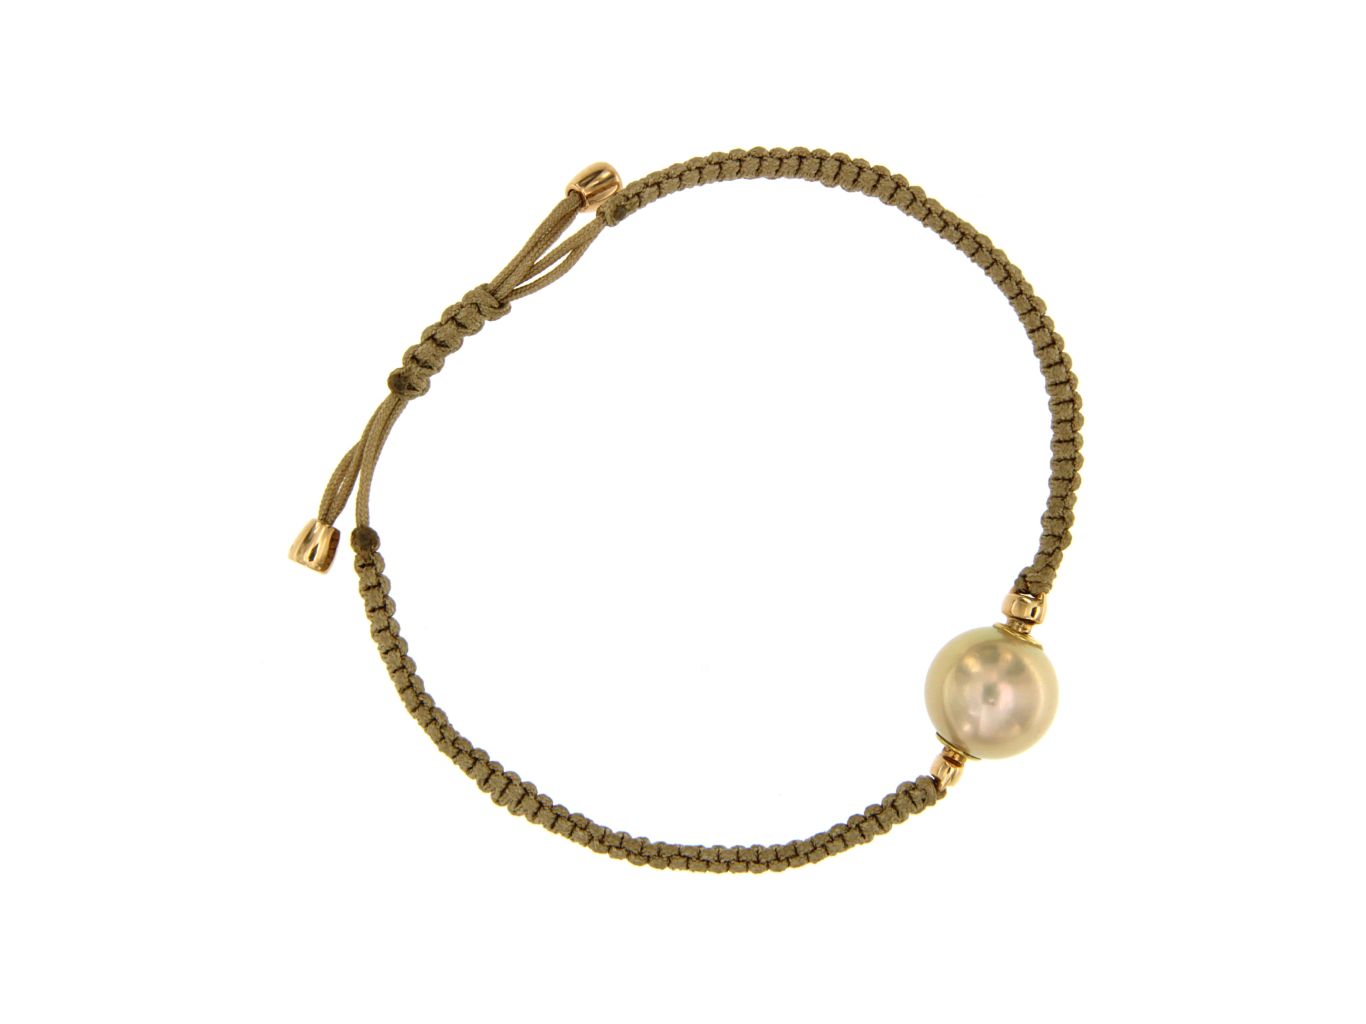 Armband geknüpft Rotgold 750, beige